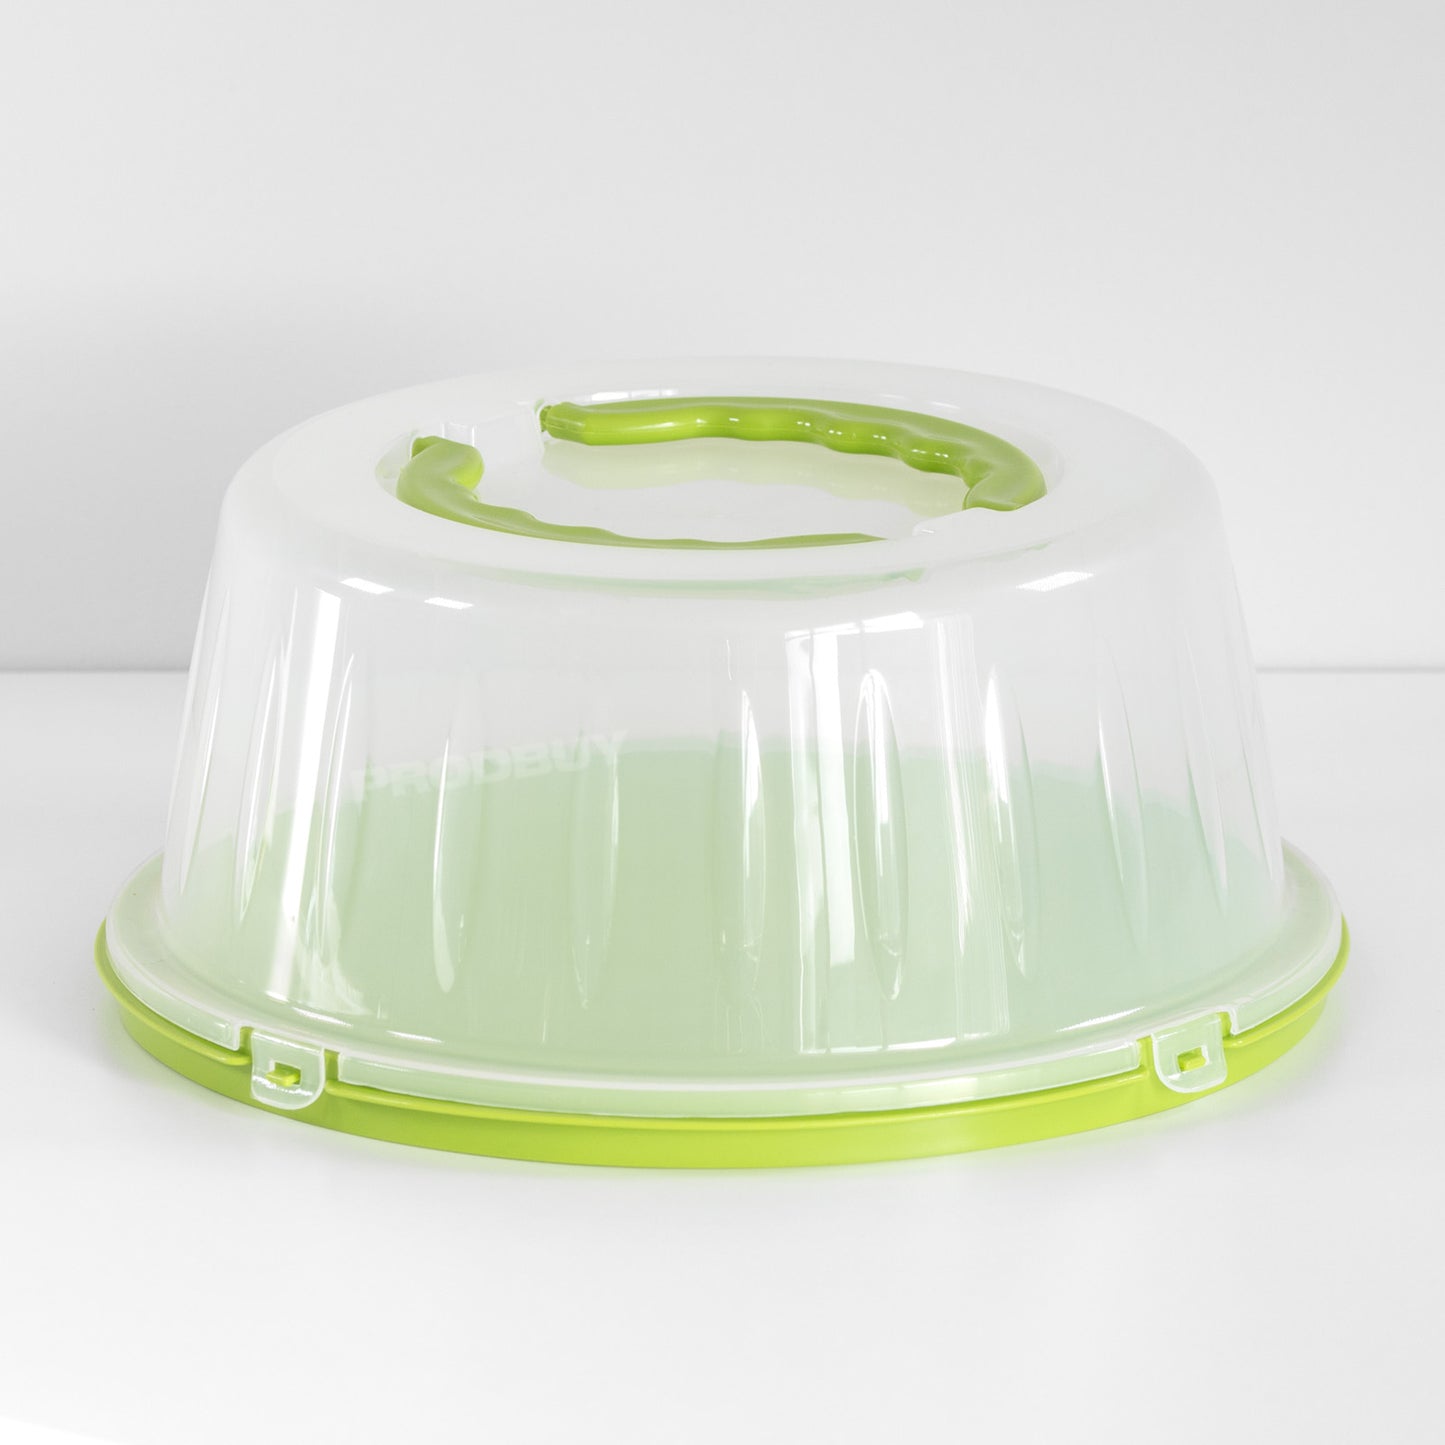 33.2cm Round Cake Carrier with Clip on Lid Cover